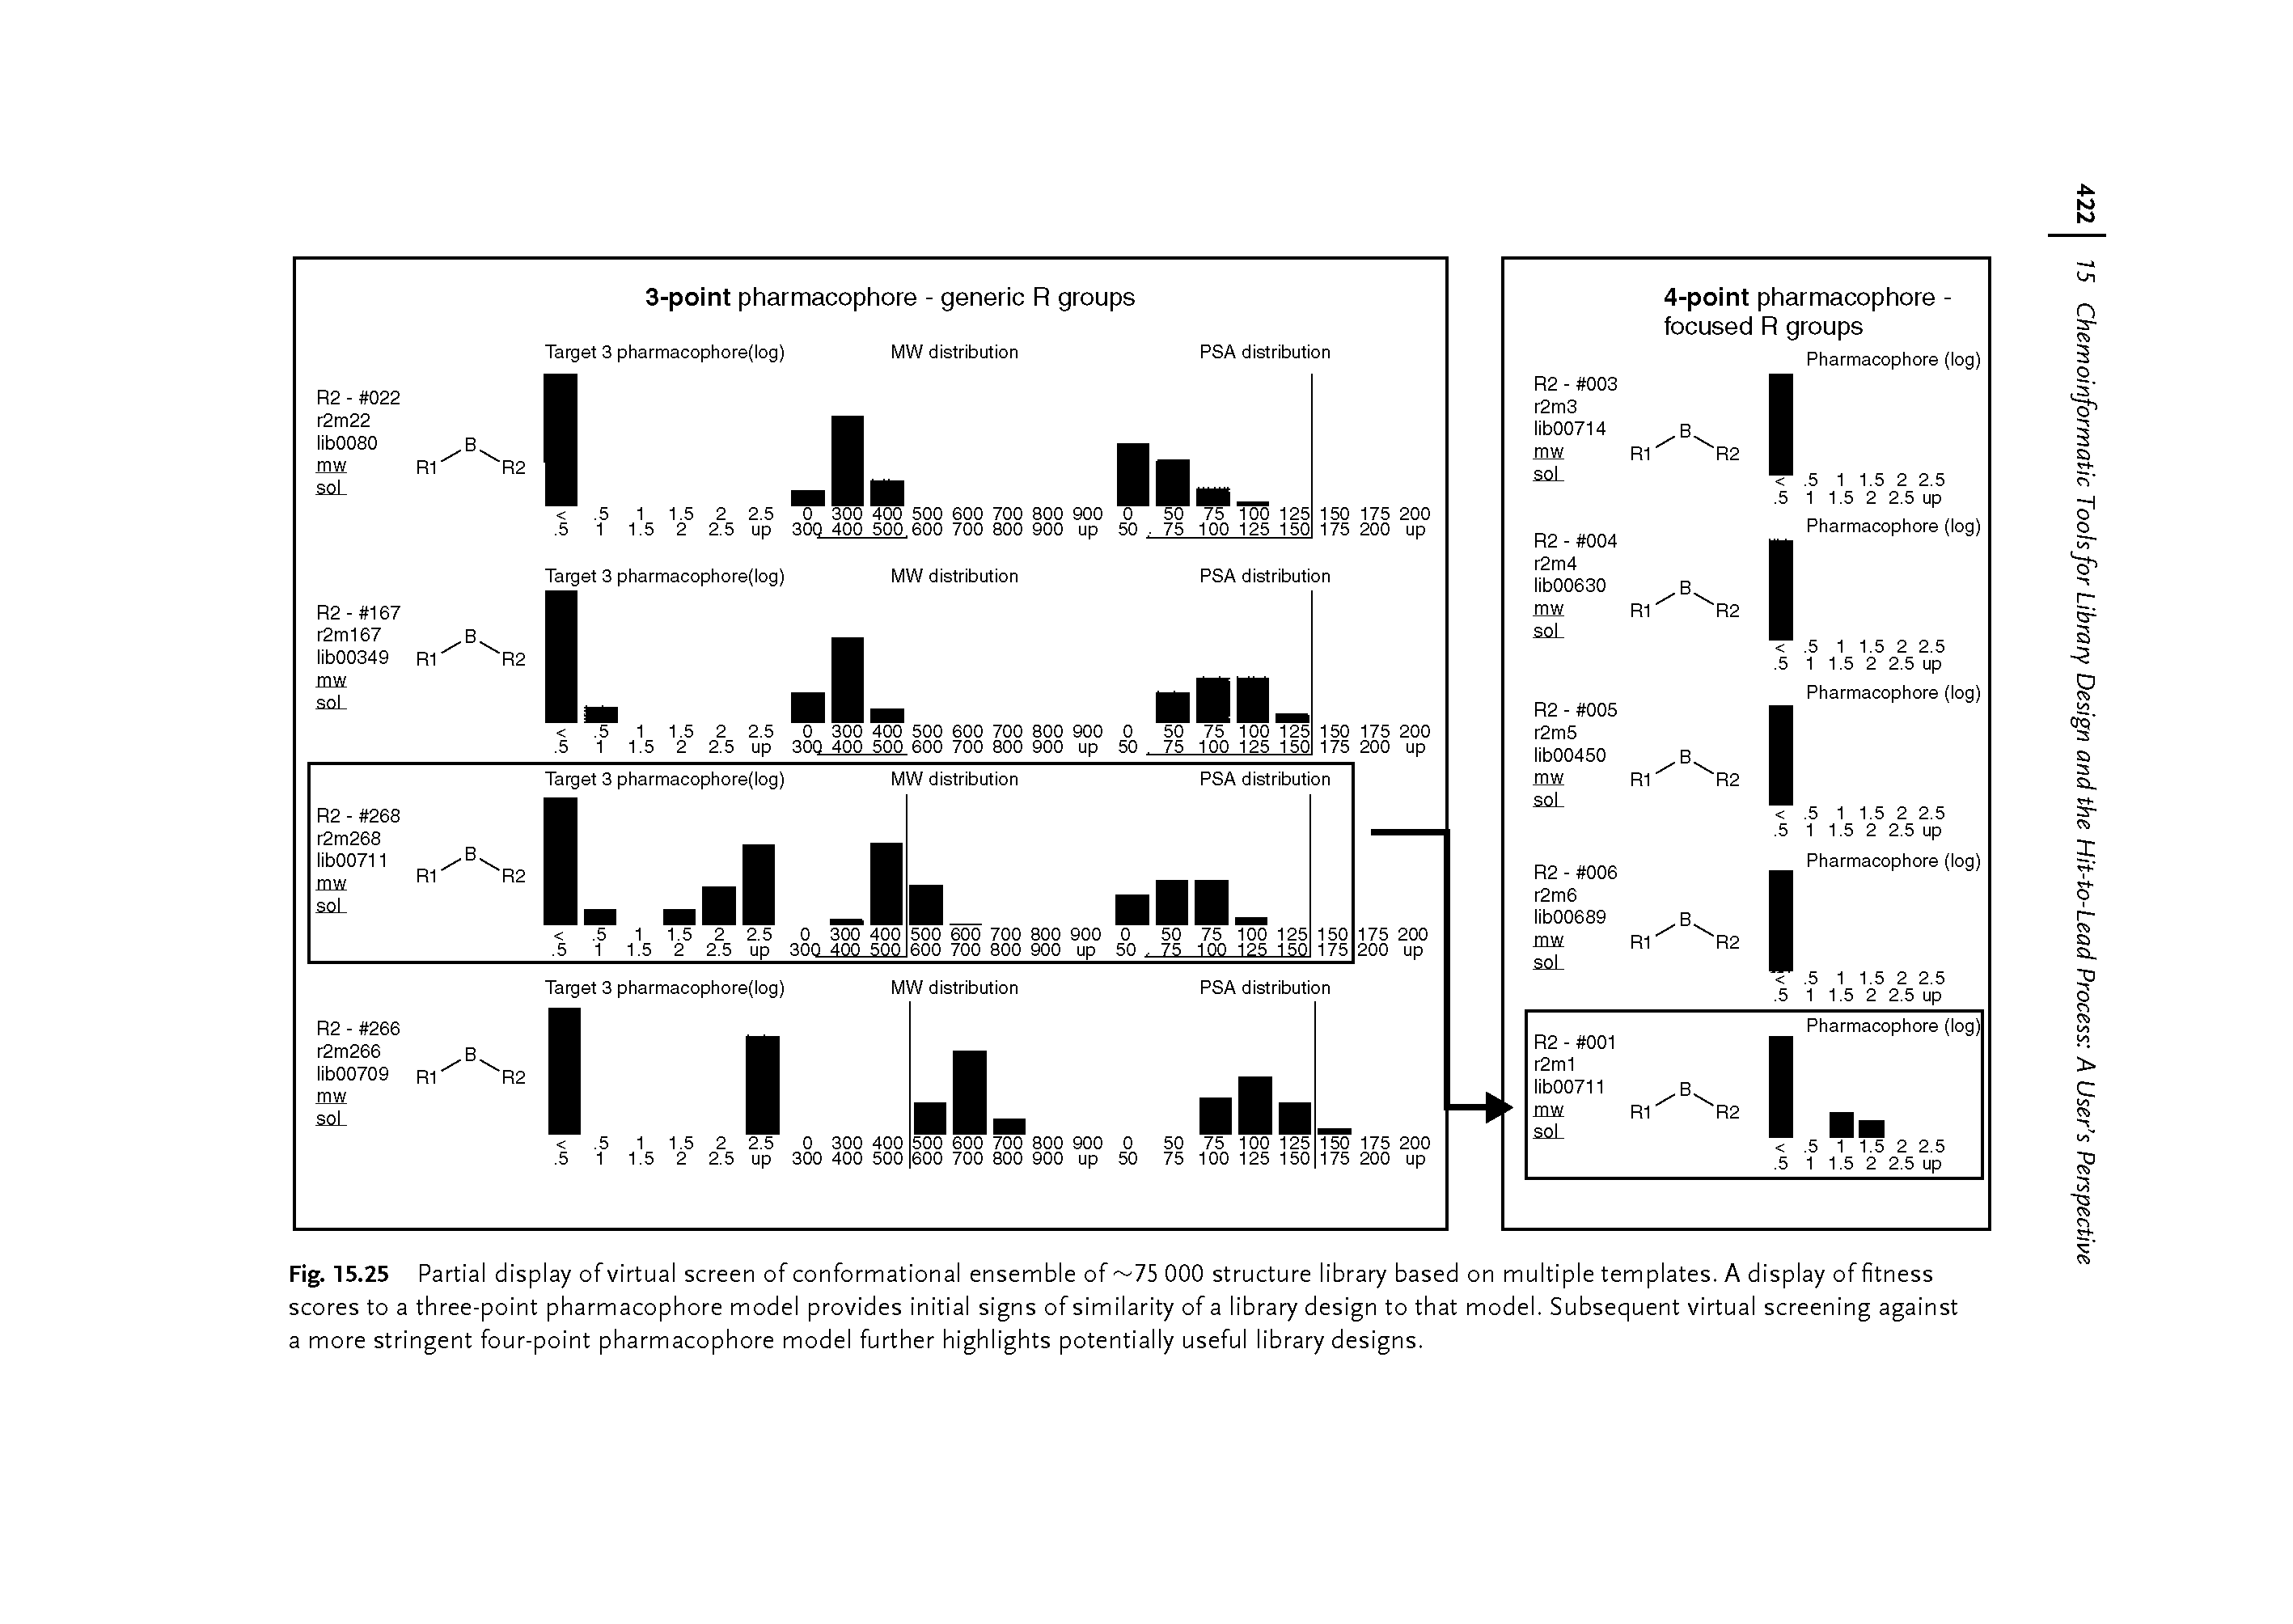 Fig. 15.25 Partial display of virtual screen of conformational ensemble of " 75 000 structure library based on multiple templates. A display of fitness scores to a three-point pharmacophore model provides initial signs of similarity of a library design to that model. Subsequent virtual screening against a more stringent four-point pharmacophore model further highlights potentially useful library designs.